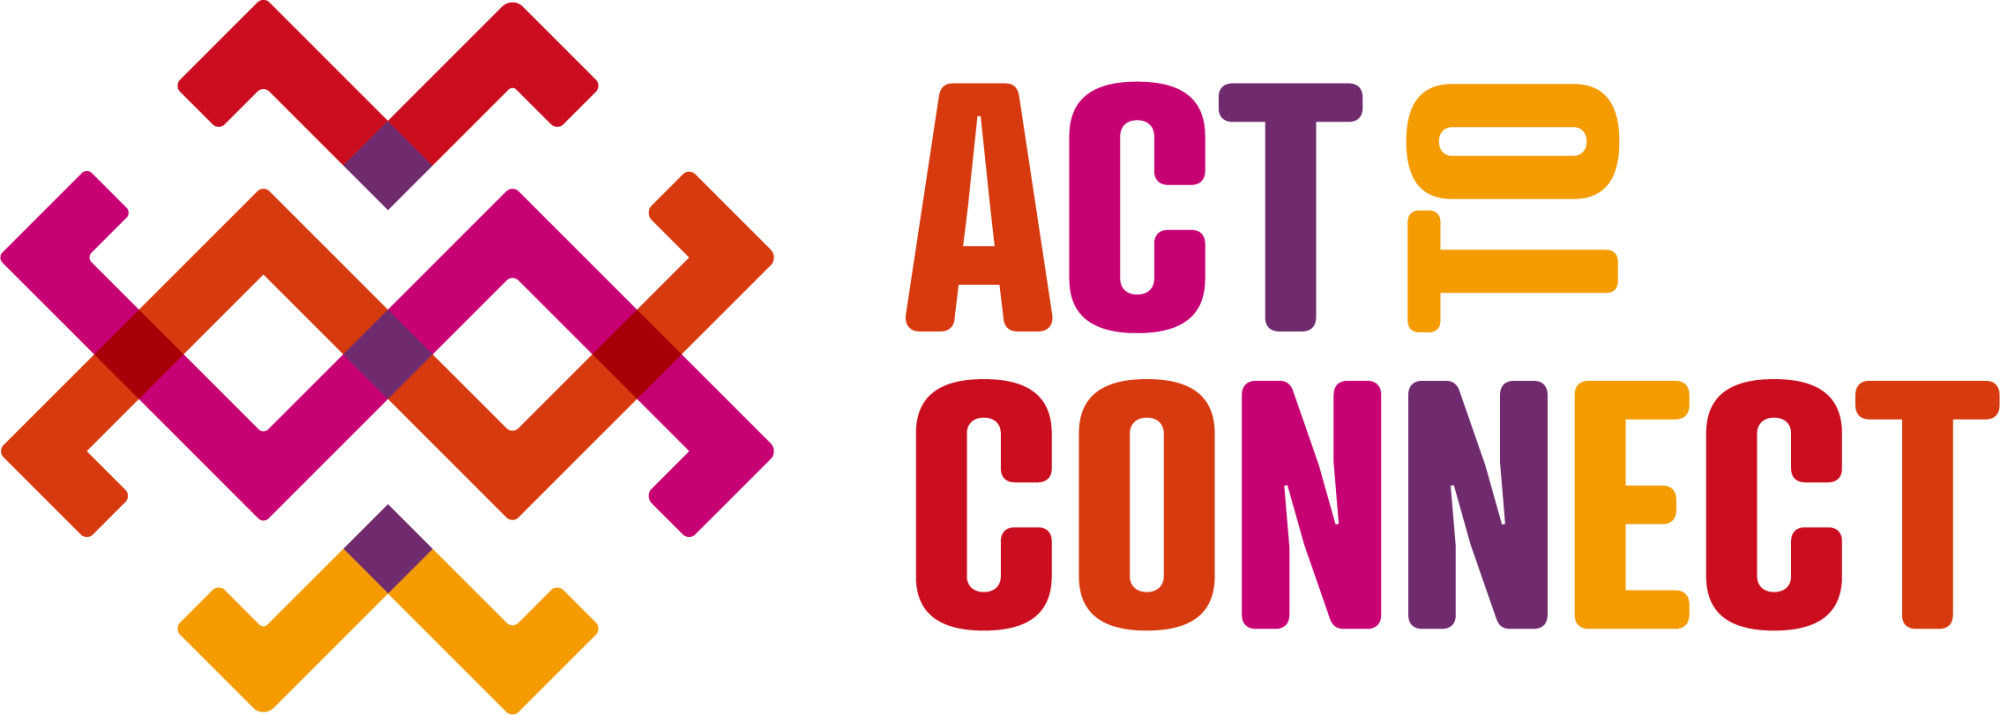 ACT TO CONNECT - WEVIEW